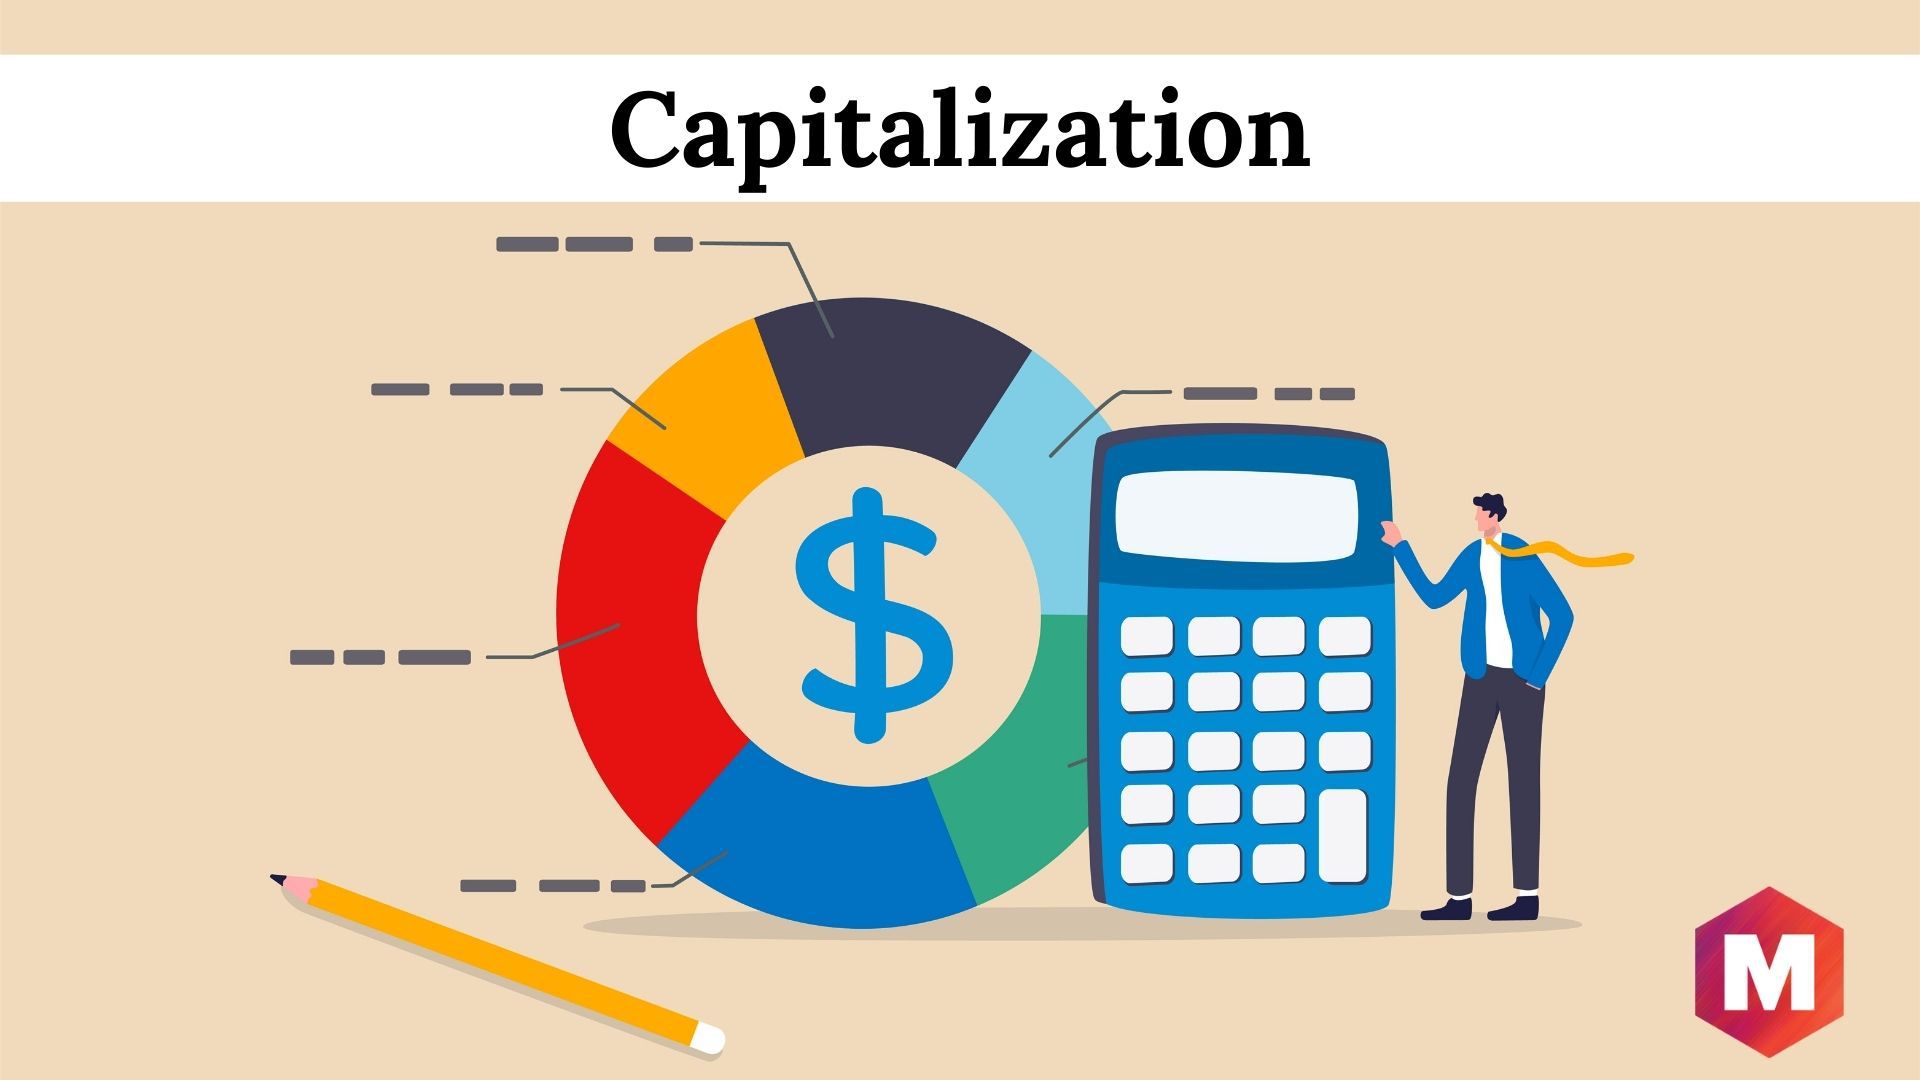 capitalization-definition-importance-and-types-marketing91